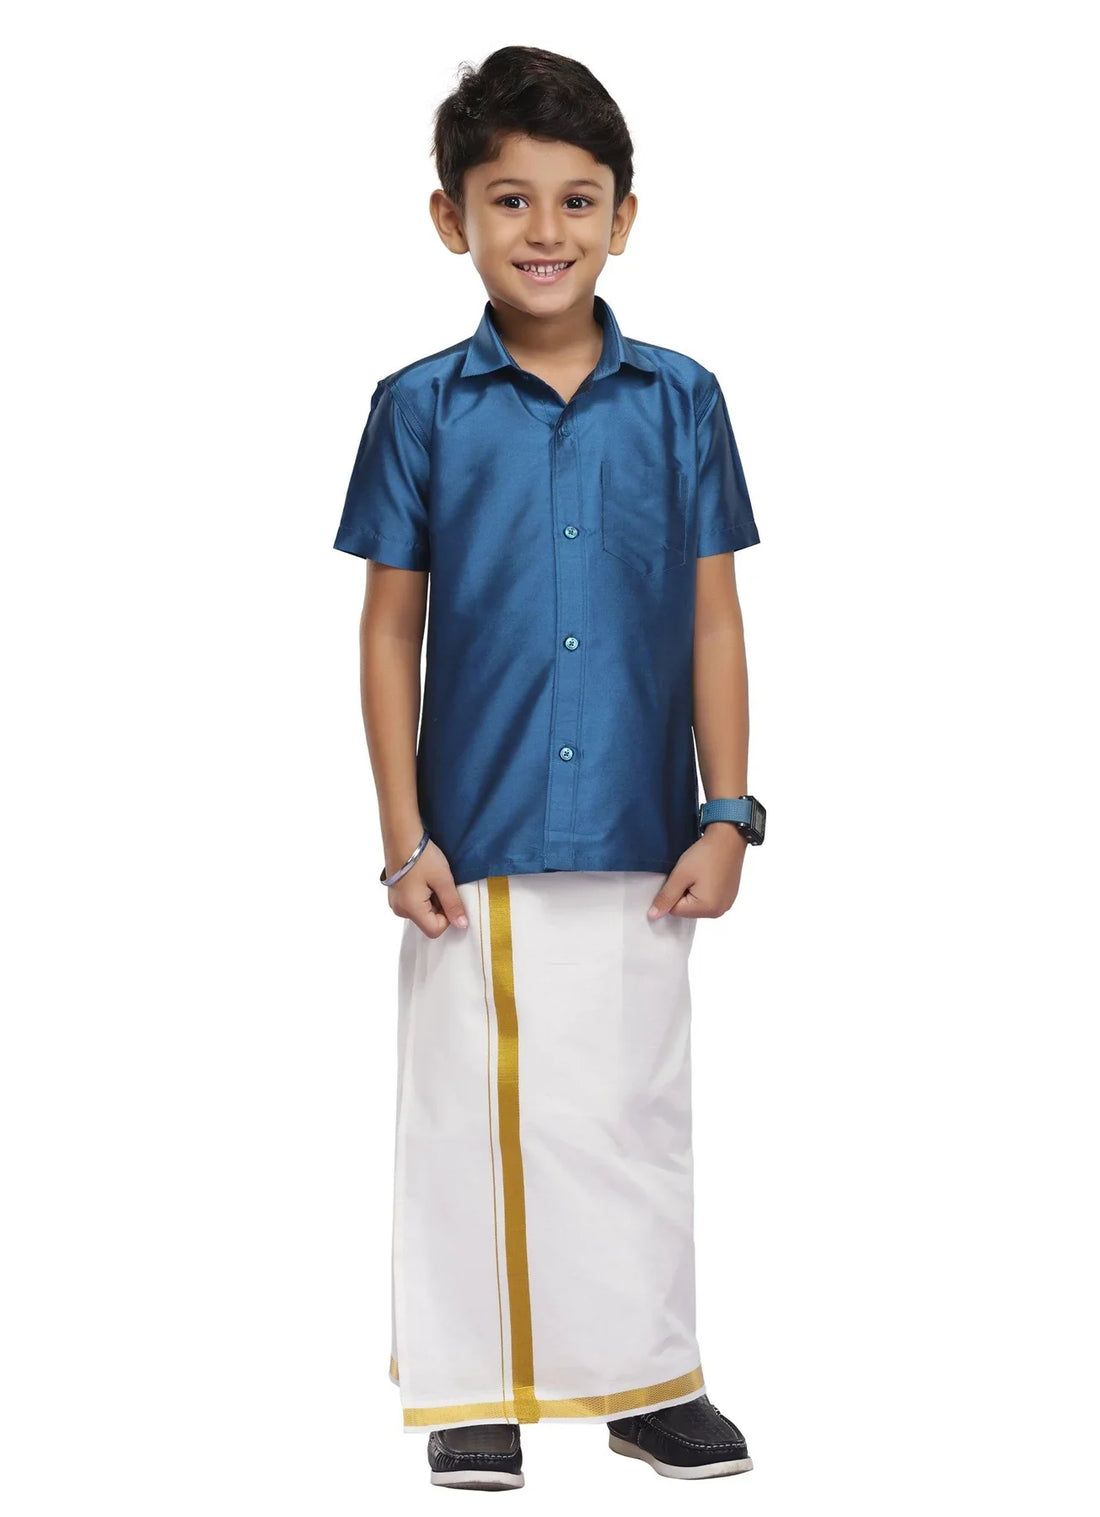 Uathayam Kids Dhoti with Shirt 2 In 1 Set - Daily Needs Products